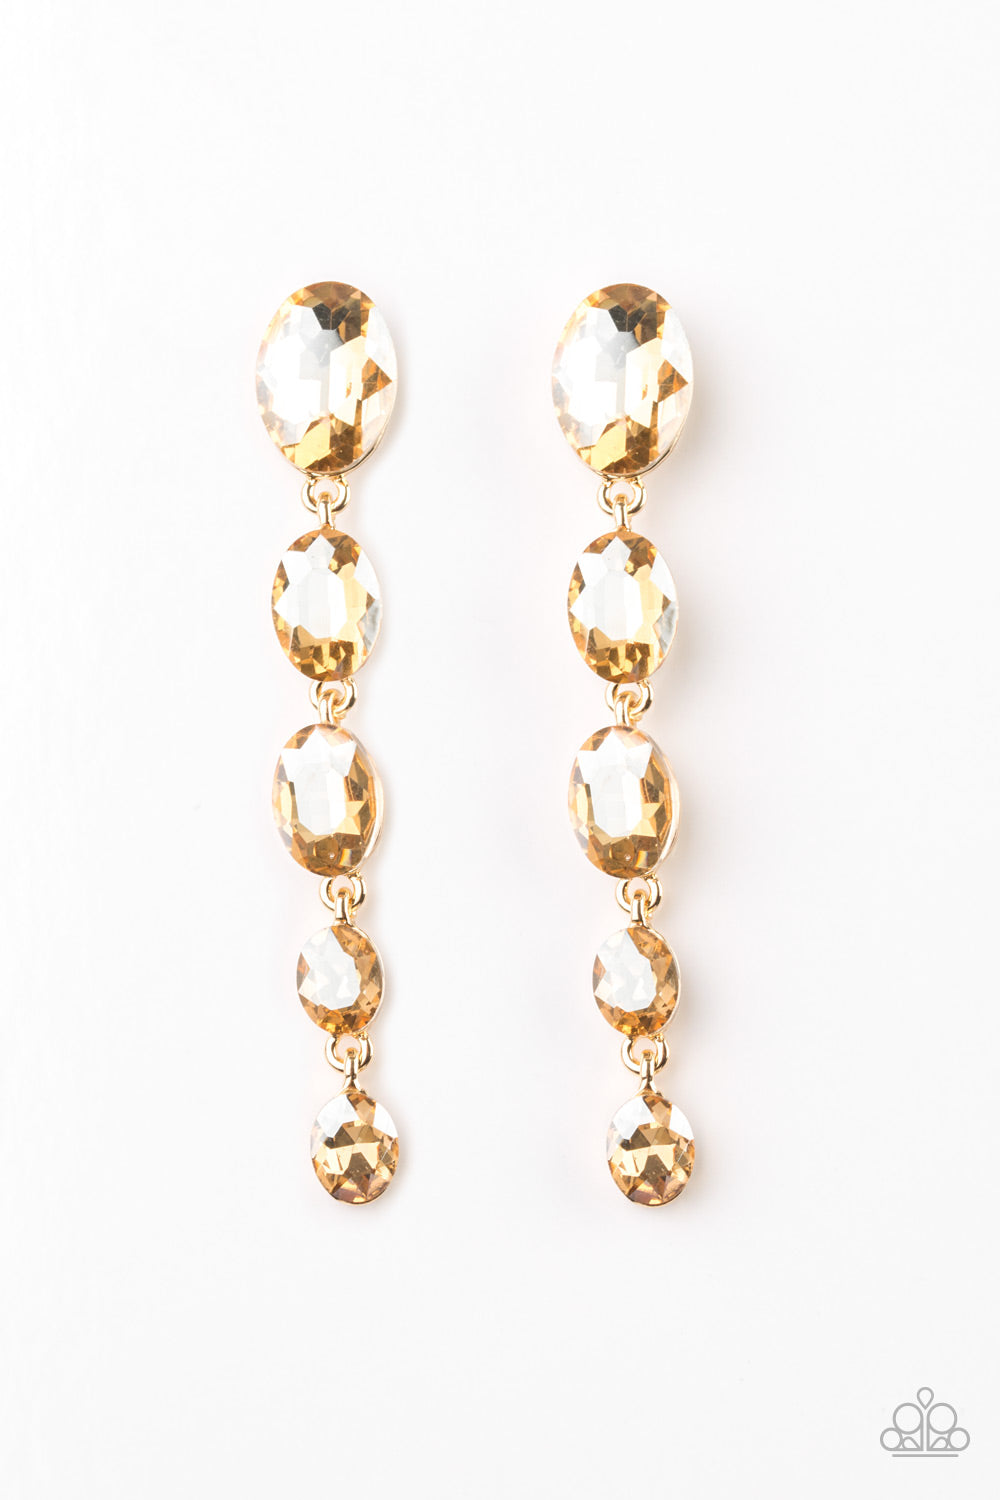 Red Carpet Radiance Gold Paparazzi Earrings Cashmere Pink Jewels - Cashmere Pink Jewels & Accessories, Cashmere Pink Jewels & Accessories - Paparazzi